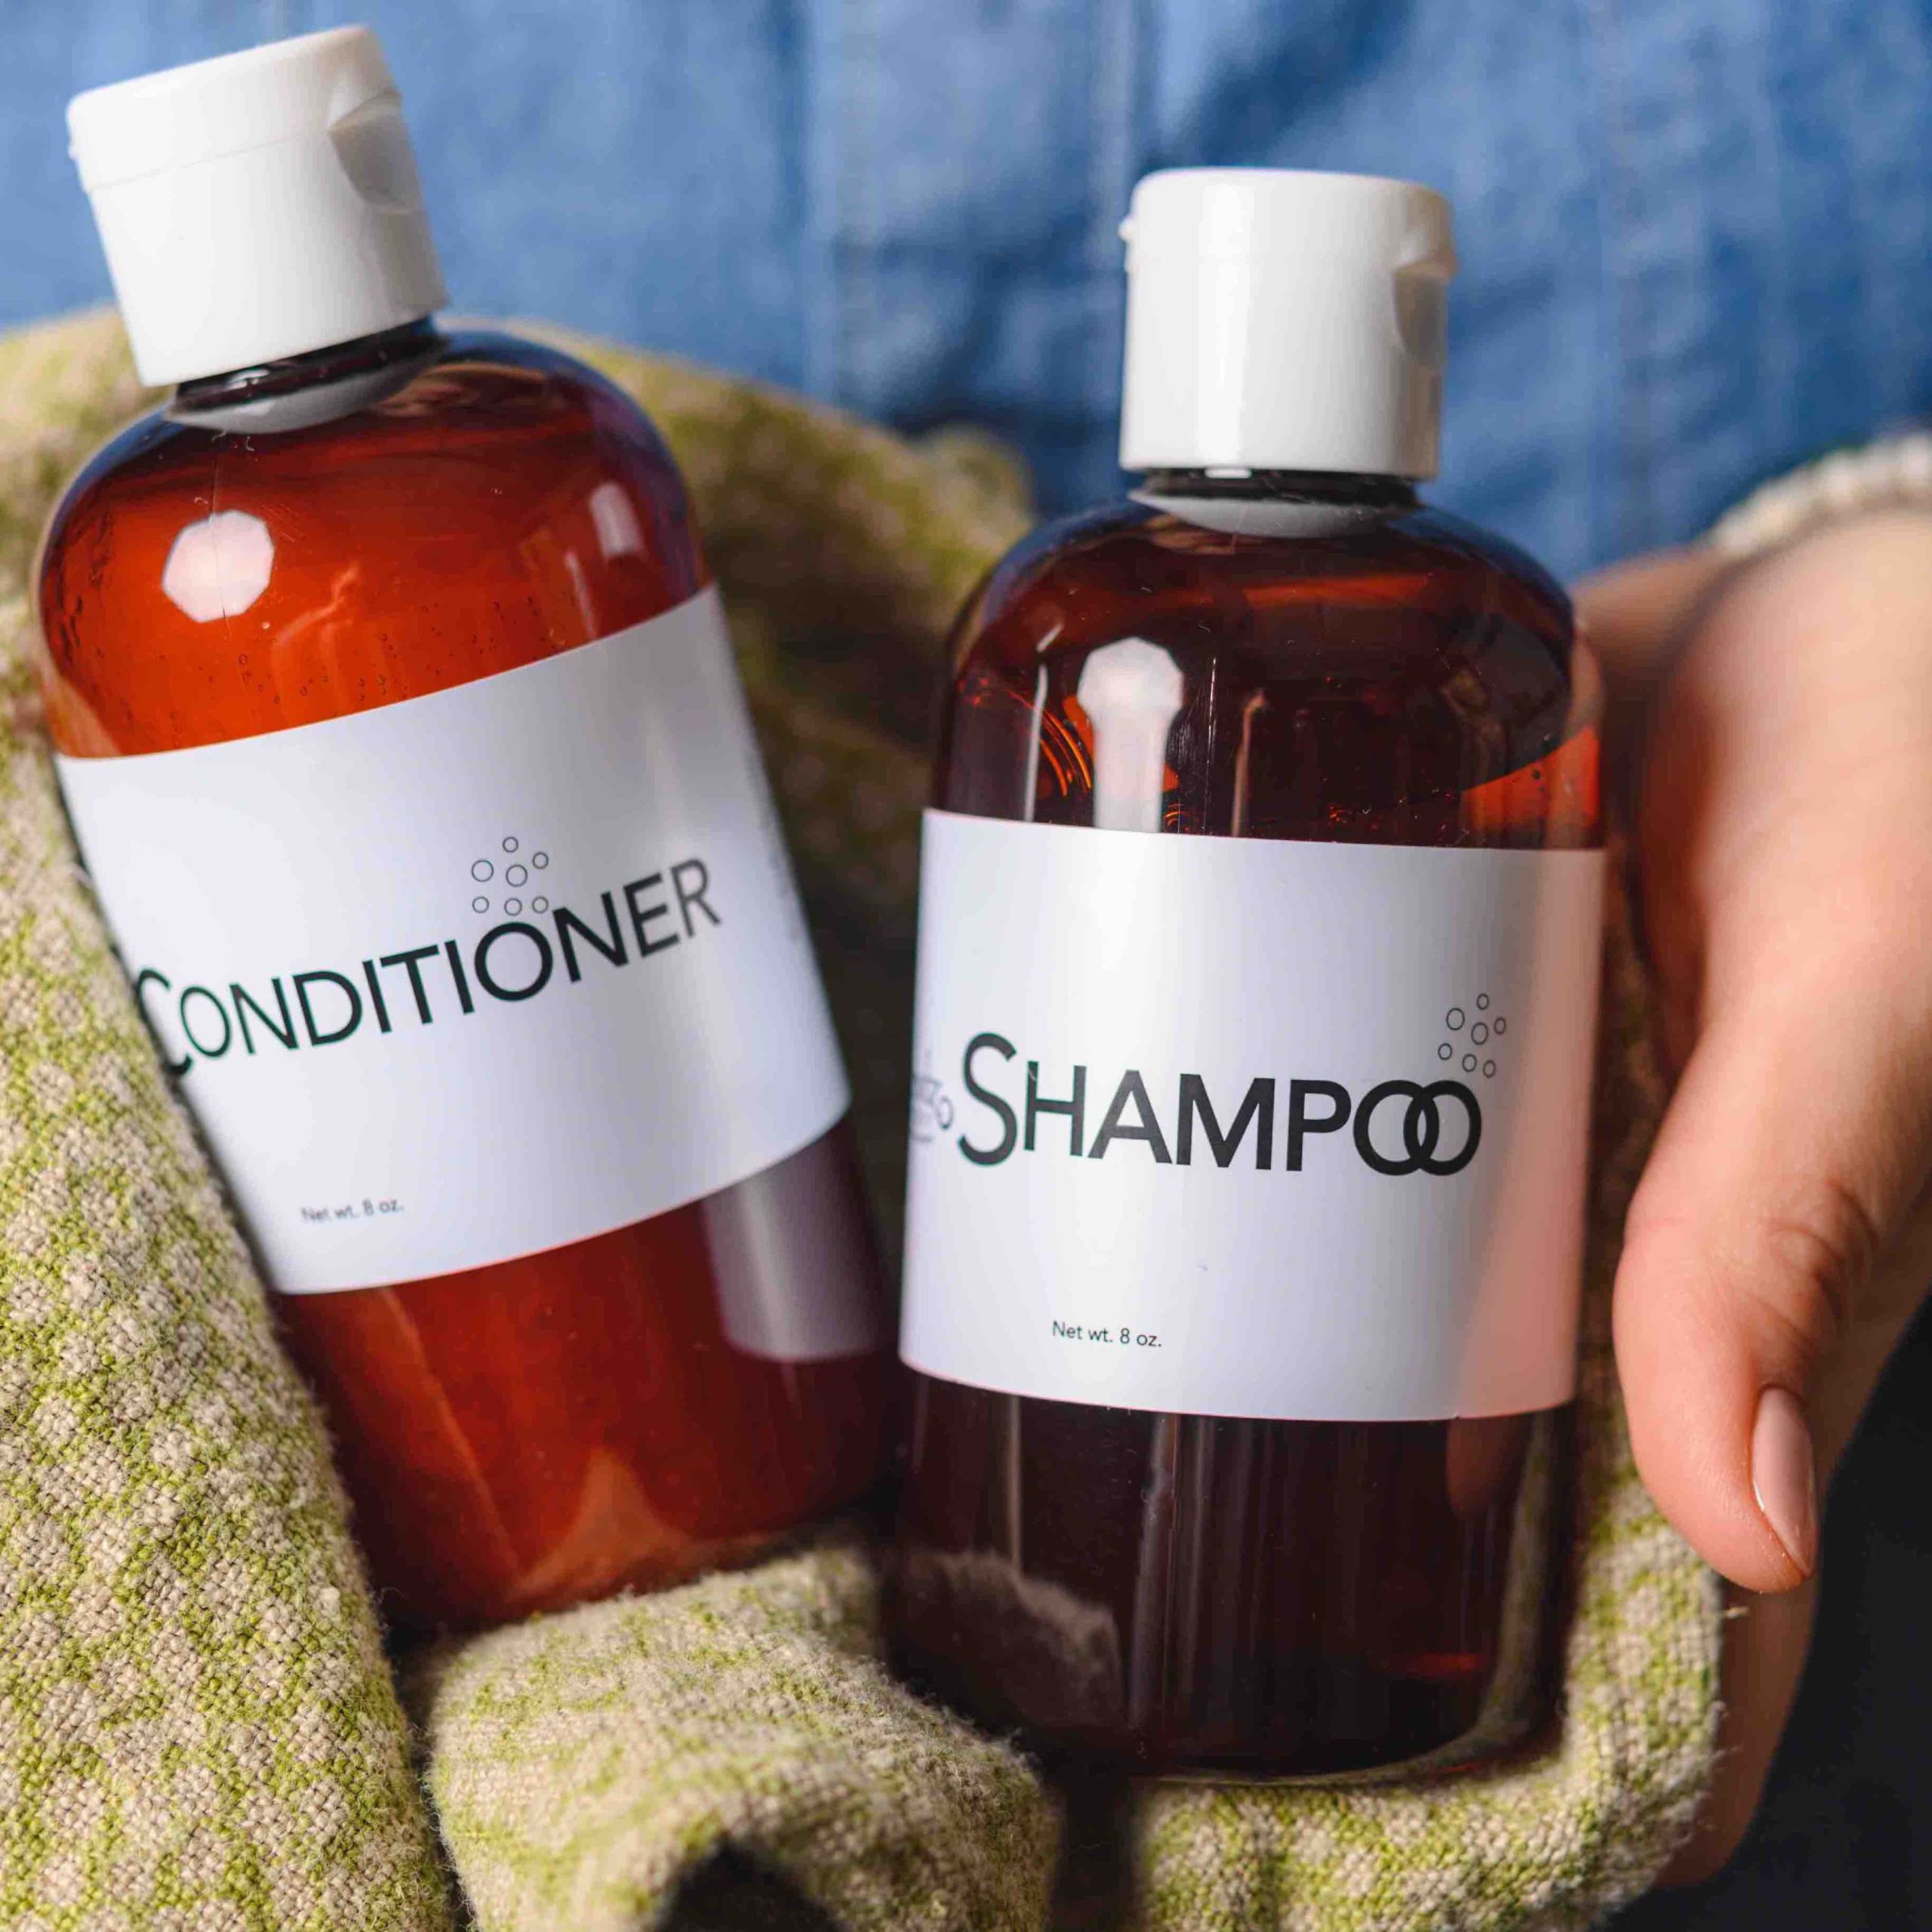 Shampoo and Conditioner in hands